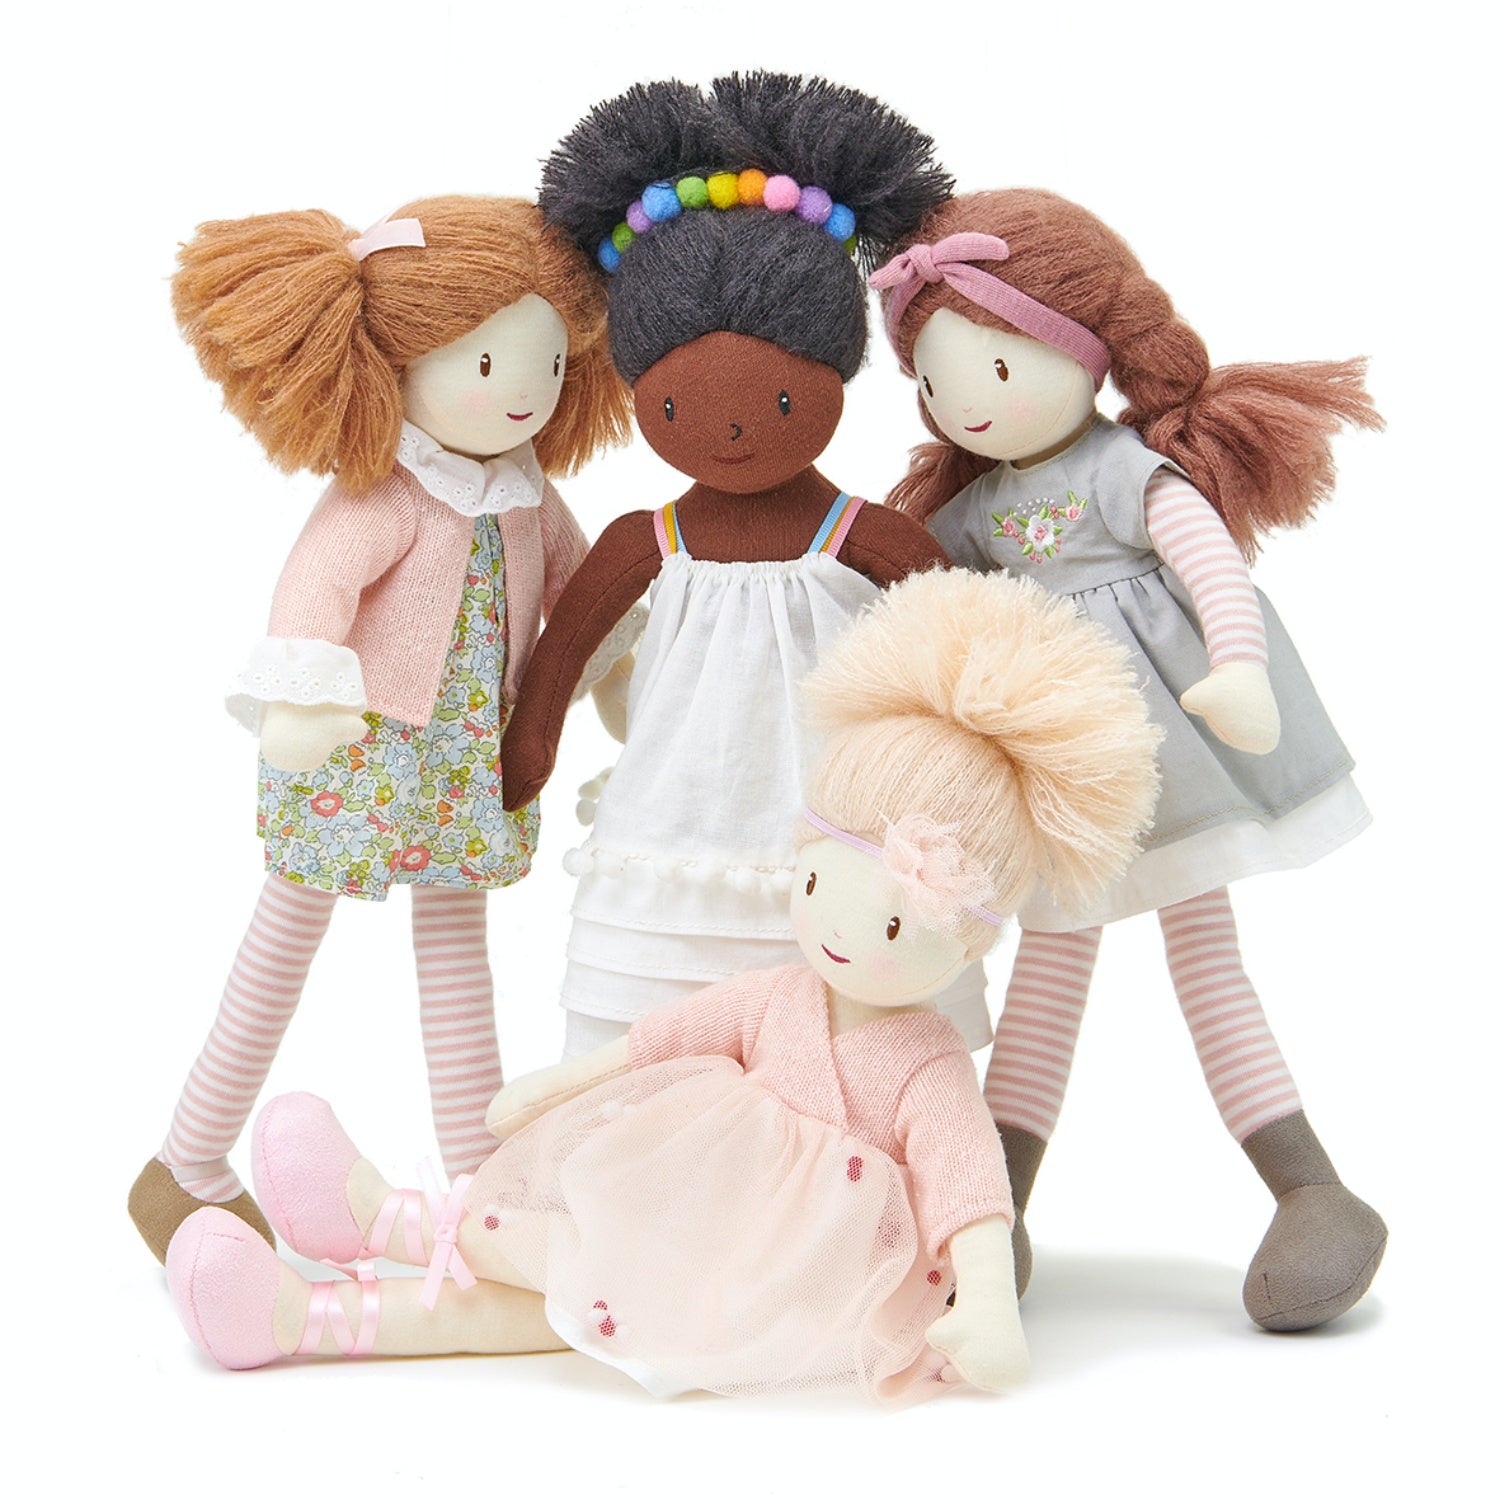 ThreadBear Design Alma Autumn Rag Doll | Soft Cotton Children’s Doll | Hand-Crafted Rag Doll | Front View – Rag Doll Alma and her friends | BeoVERDE.ie